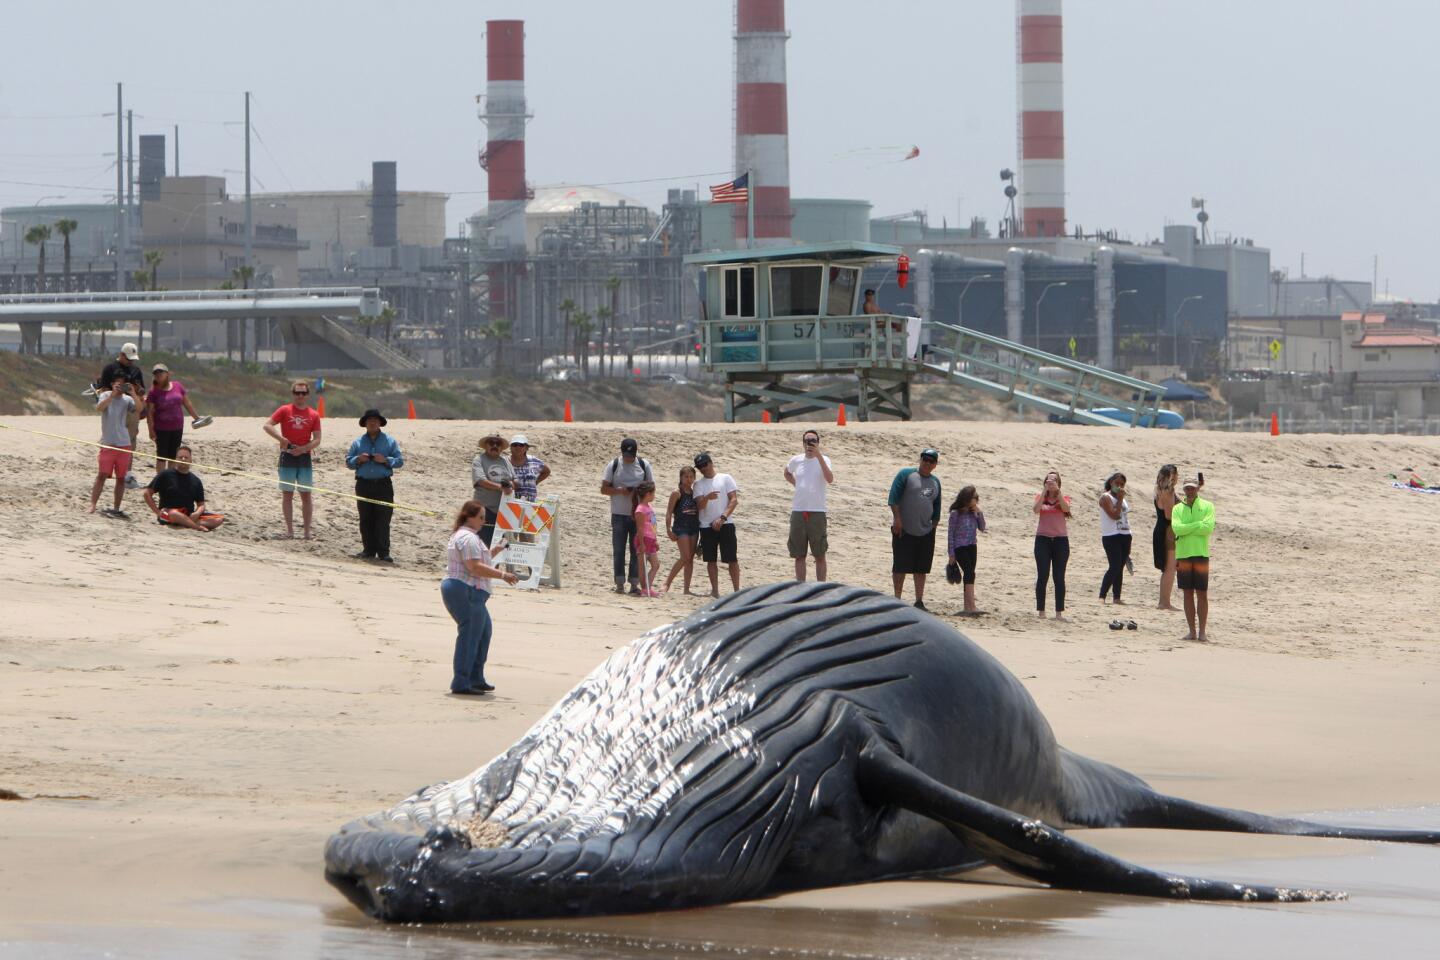 Beach goers look at a 45-foot, 40-ton female Humpback whale carcass that washed up onshore overnight at Dockweiler State Beach, on Friday, July 1, 2016. Scientists examined the whale and took samples during the day. The whale carcass was towed out to sea Friday evening by lifeguard boats.